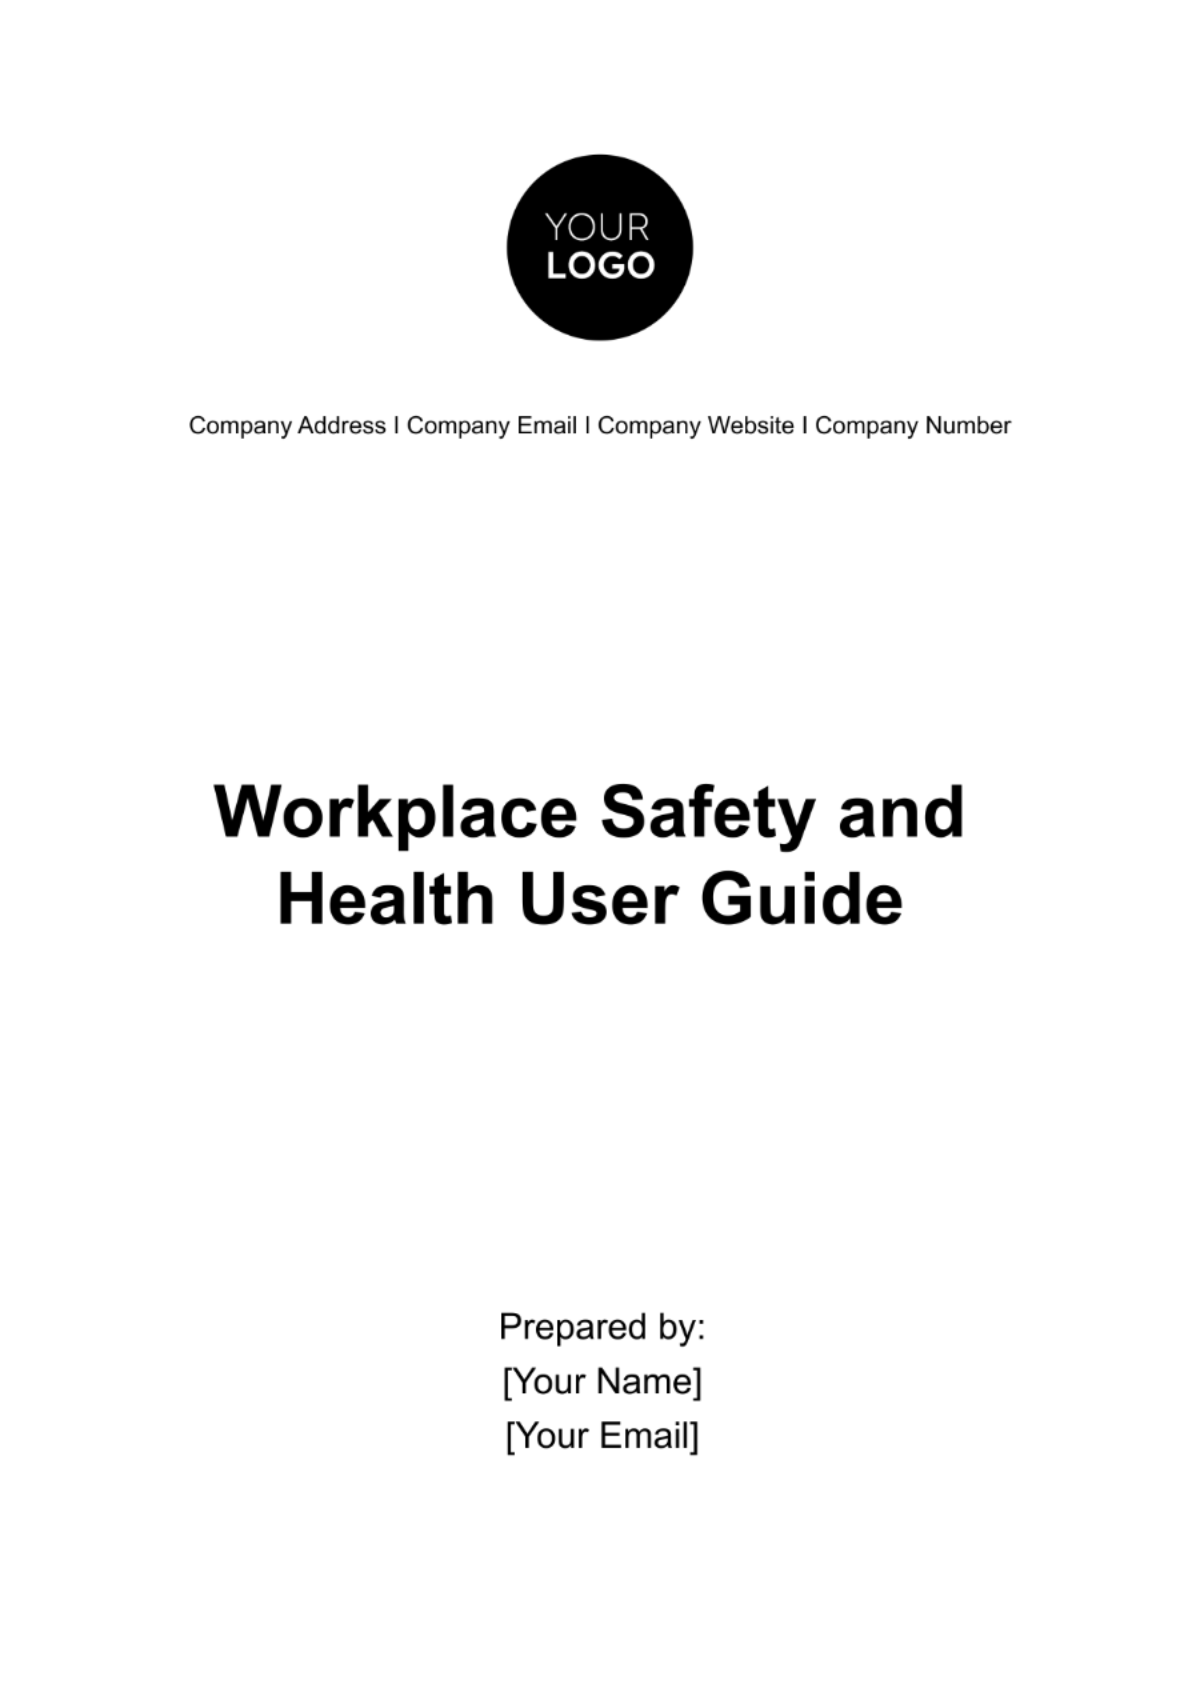 Free Workplace Safety and Health User Guide Template